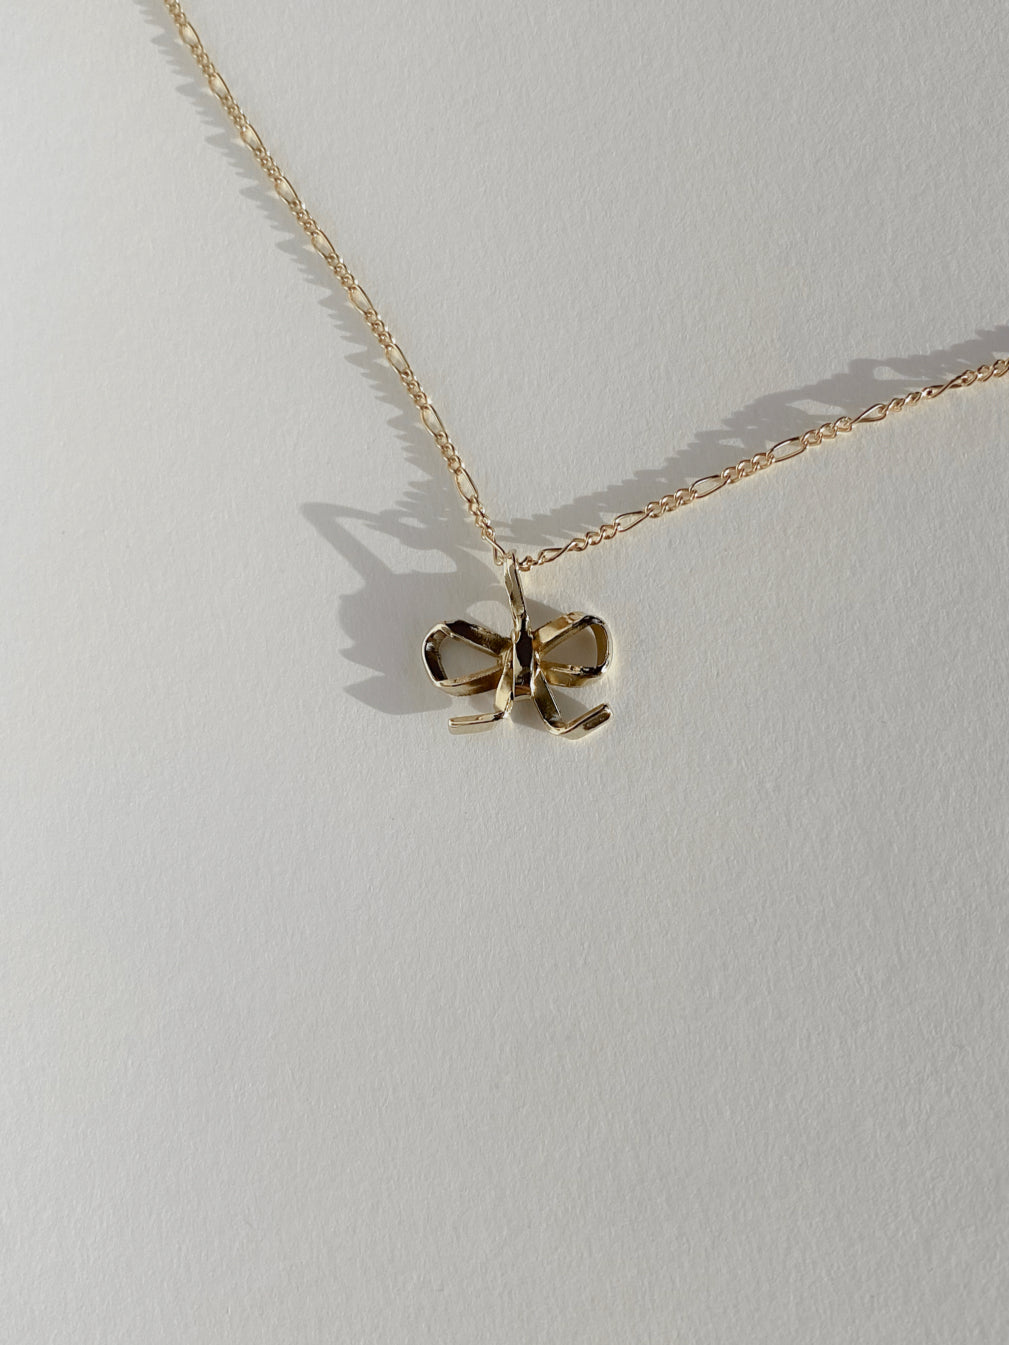 Gold bow charm necklace on white background